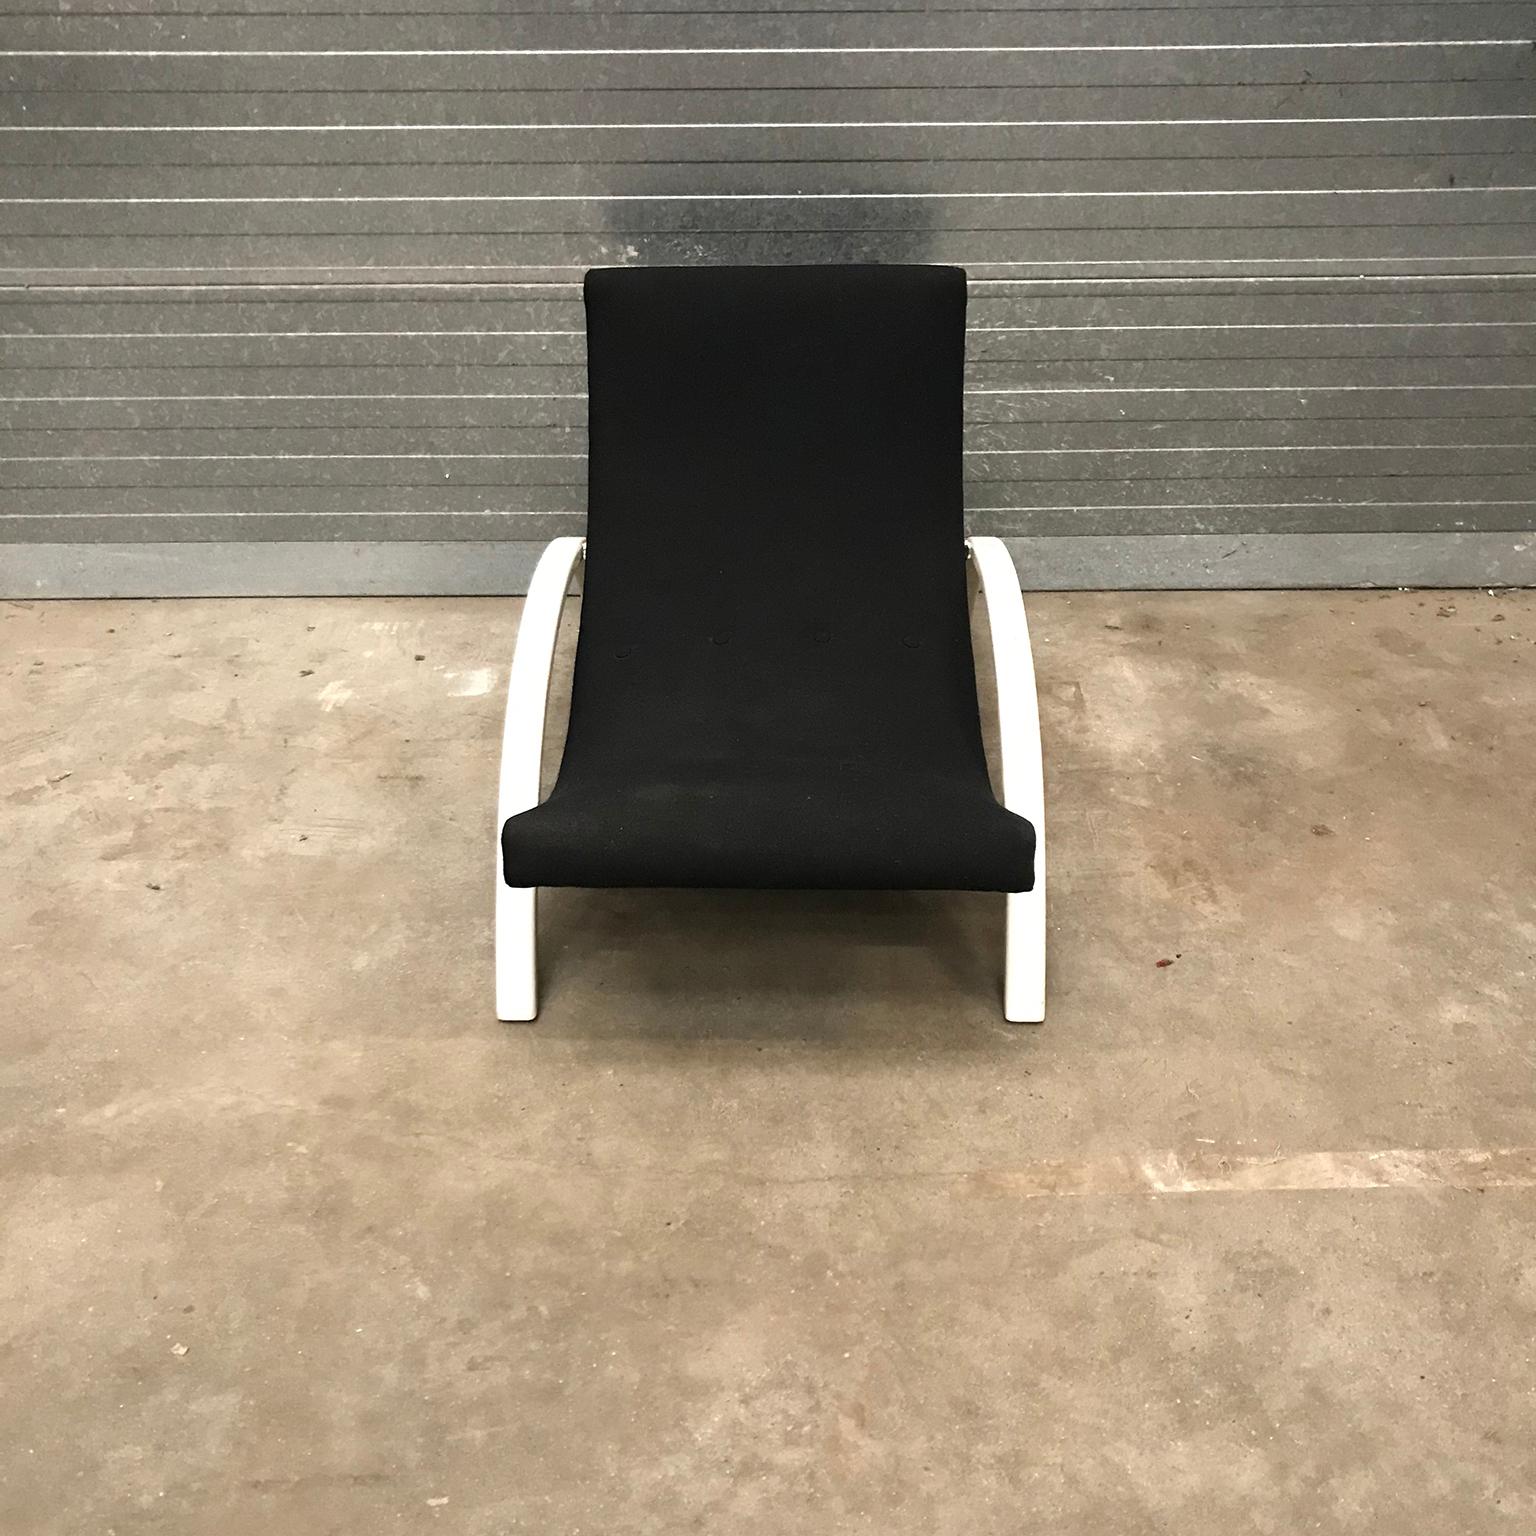 Elegant Infinitely Adjustable Easy Chair in Black Fabric & White Wood circa 1960 For Sale 6